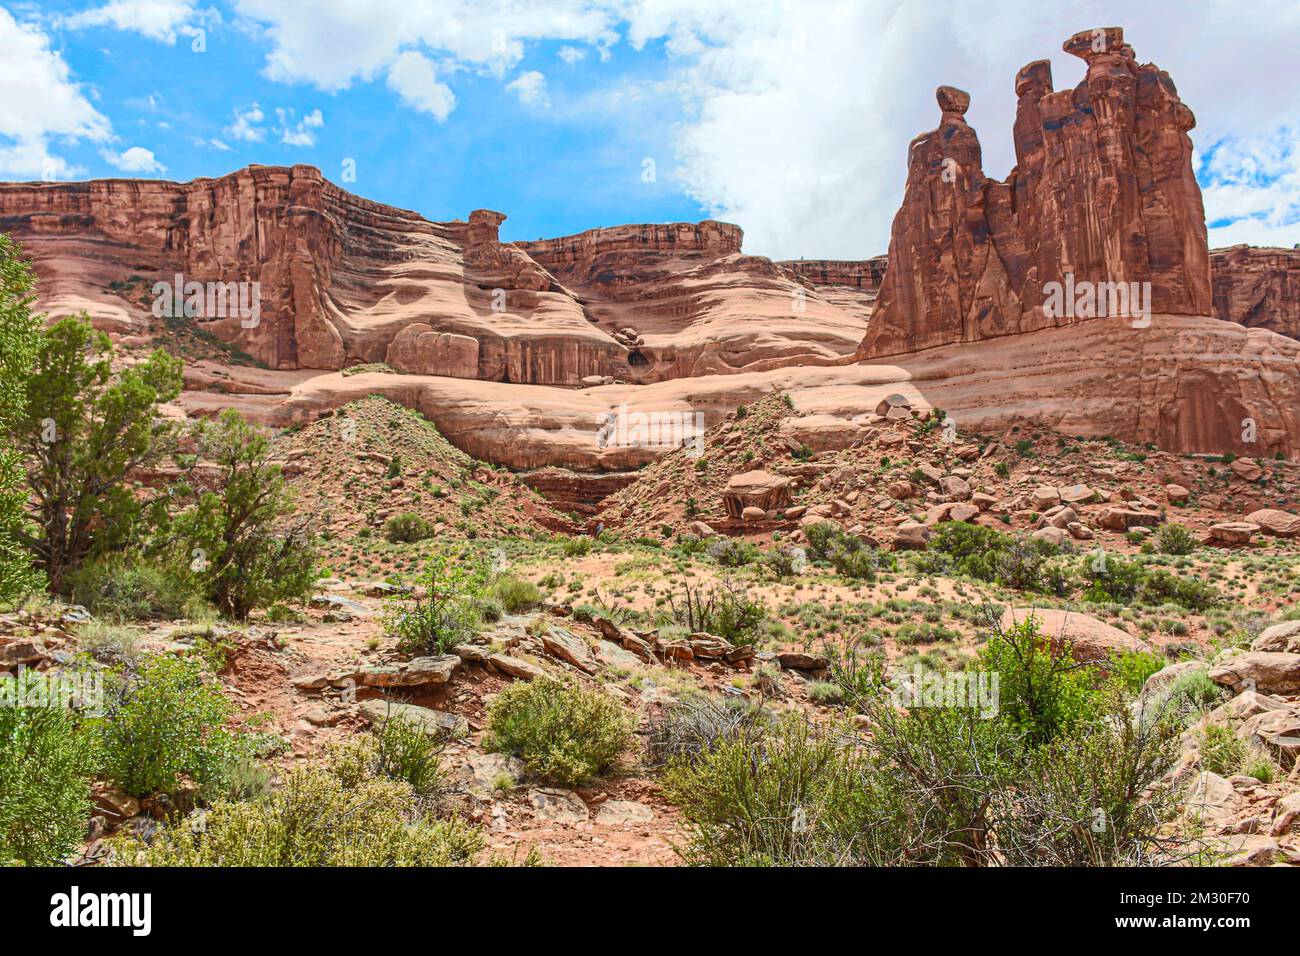 The Three Gossips rock structures on the Park Avenue Trail in Courthouse Towers area of Arches National Park, Moab, Utah, USA Stock Photo